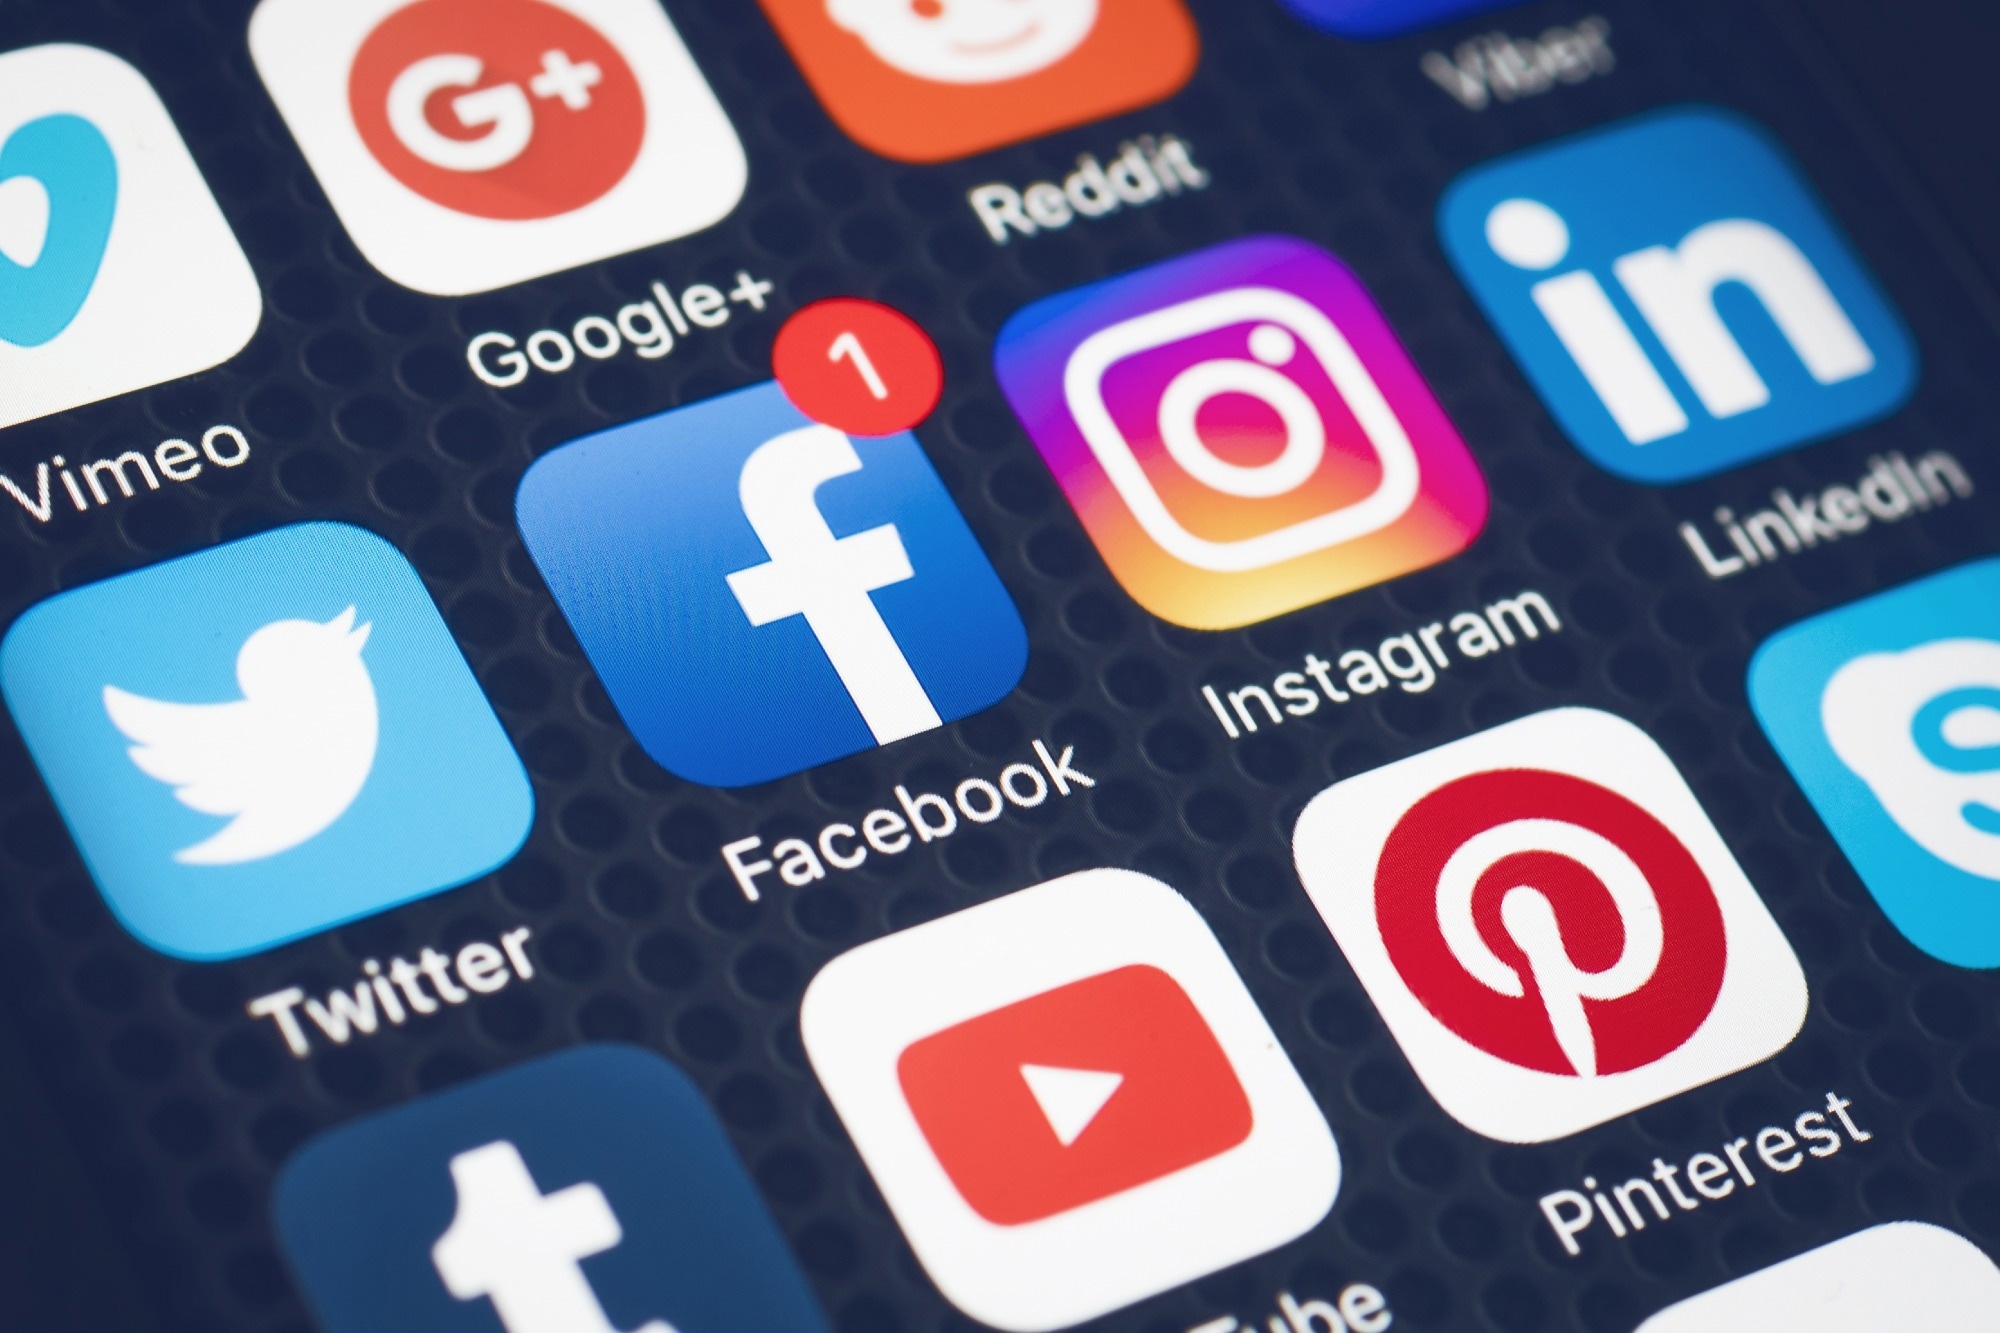 Study: Communication of COVID-19 Misinformation on Social Media by Physicians in the US. Image Credit: Twin Design/Shutterstock.com